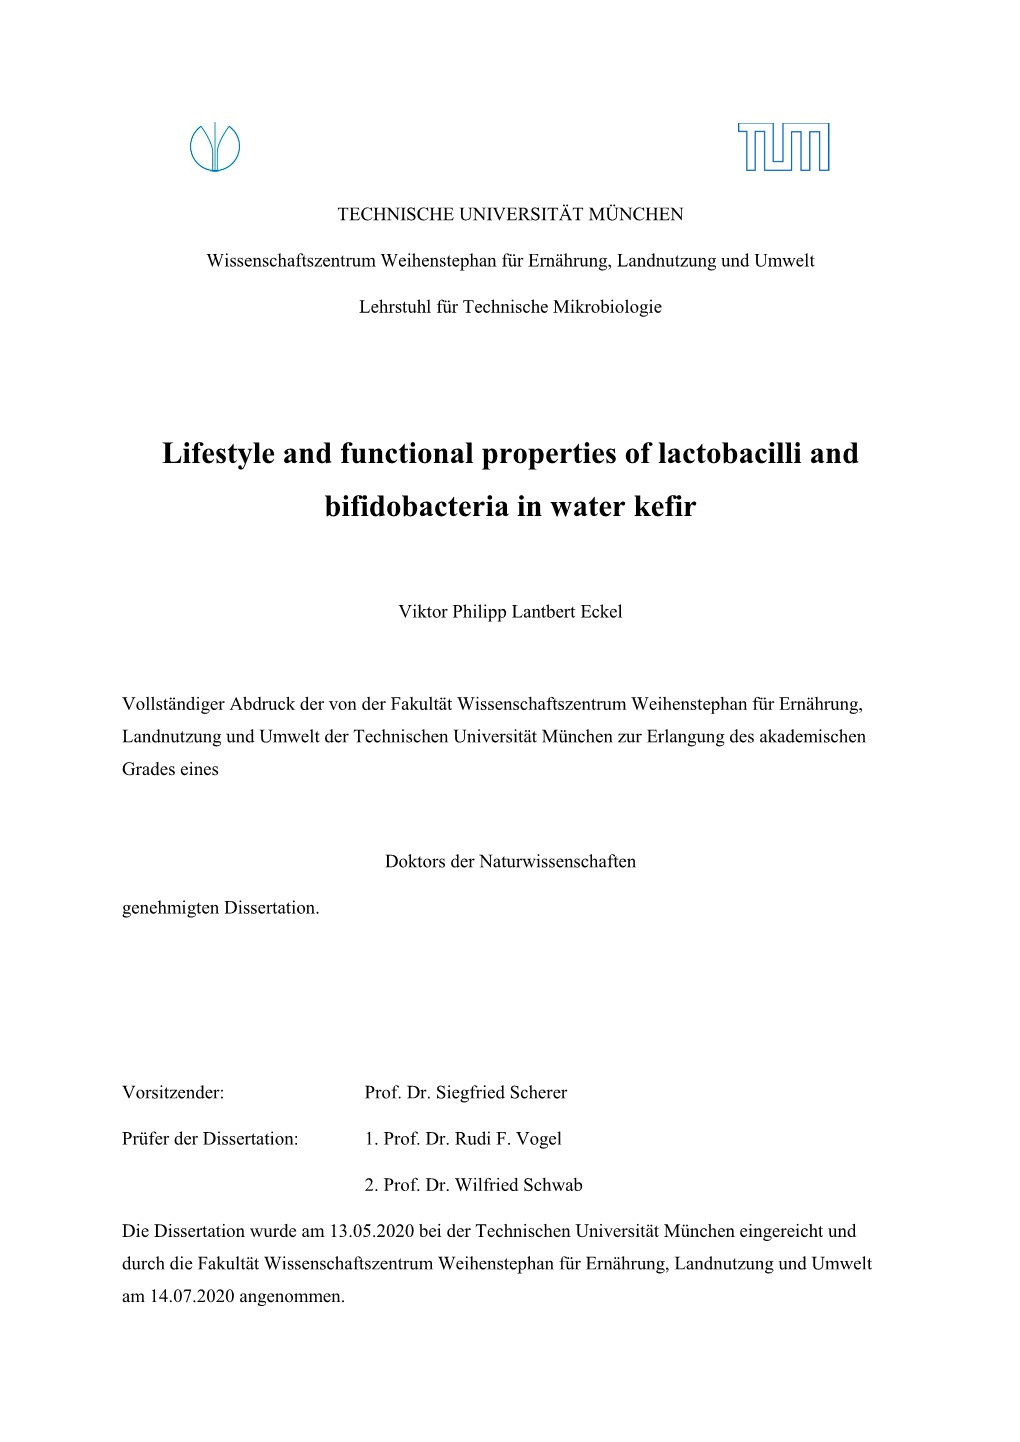 Lifestyle and Functional Properties of Lactobacilli and Bifidobacteria in Water Kefir